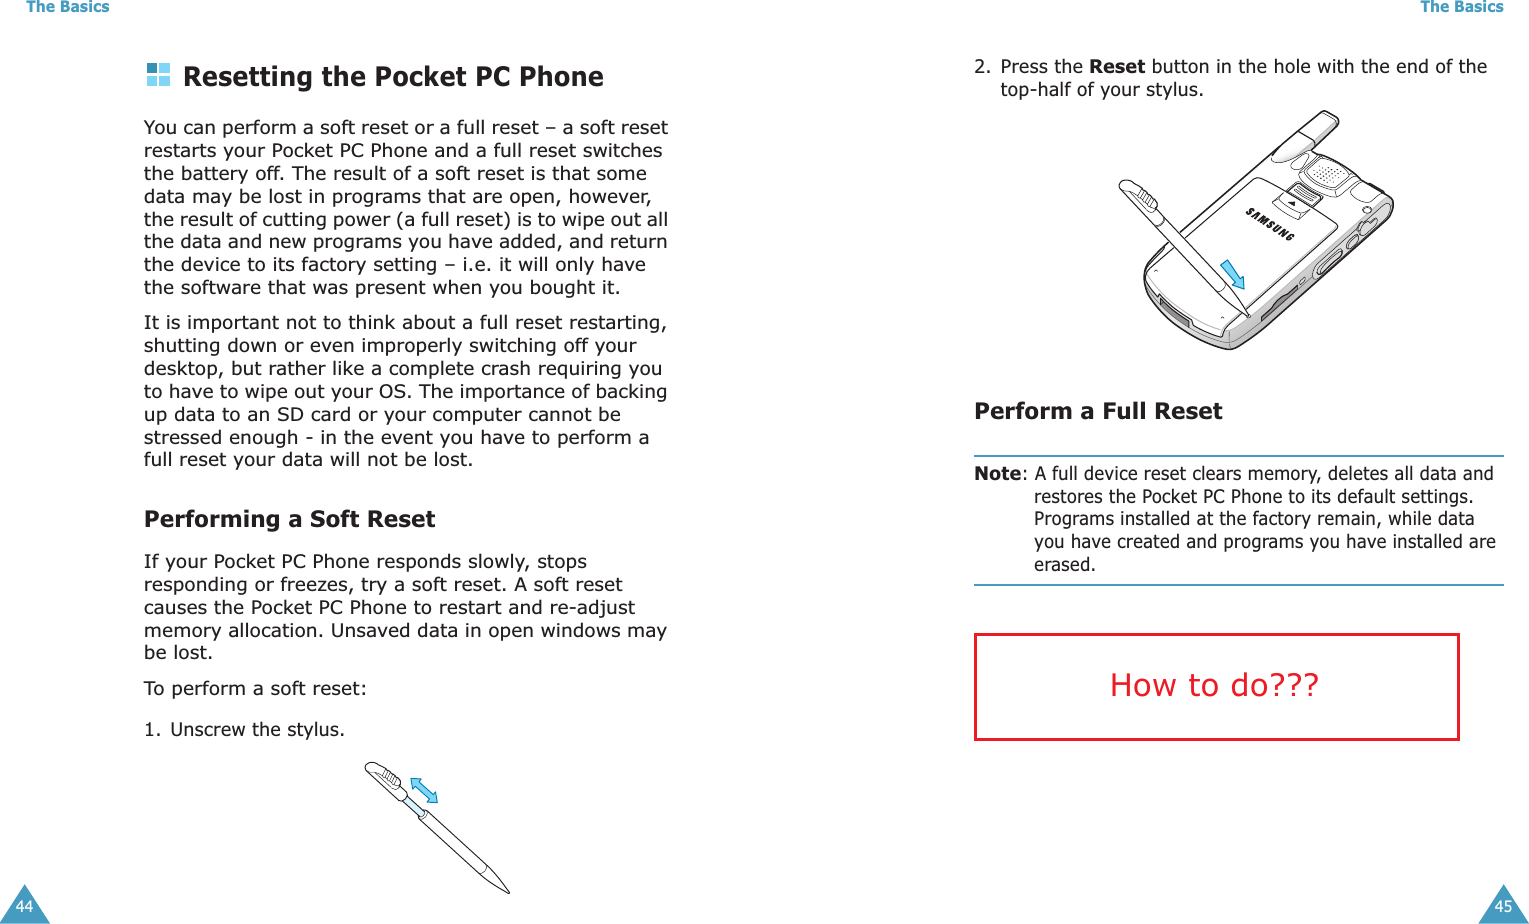 The Basics44Resetting the Pocket PC PhoneYou can perform a soft reset or a full reset – a soft reset restarts your Pocket PC Phone and a full reset switches the battery off. The result of a soft reset is that some data may be lost in programs that are open, however, the result of cutting power (a full reset) is to wipe out all the data and new programs you have added, and return the device to its factory setting – i.e. it will only have the software that was present when you bought it. It is important not to think about a full reset restarting, shutting down or even improperly switching off your desktop, but rather like a complete crash requiring you to have to wipe out your OS. The importance of backing up data to an SD card or your computer cannot be stressed enough - in the event you have to perform a full reset your data will not be lost.Performing a Soft ResetIf your Pocket PC Phone responds slowly, stops responding or freezes, try a soft reset. A soft reset causes the Pocket PC Phone to restart and re-adjust memory allocation. Unsaved data in open windows may be lost.To perform a soft reset:1. Unscrew the stylus.The Basics452. Press the Reset button in the hole with the end of the top-half of your stylus.Perform a Full ResetNote: A full device reset clears memory, deletes all data and restores the Pocket PC Phone to its default settings. Programs installed at the factory remain, while data you have created and programs you have installed are erased.How to do???